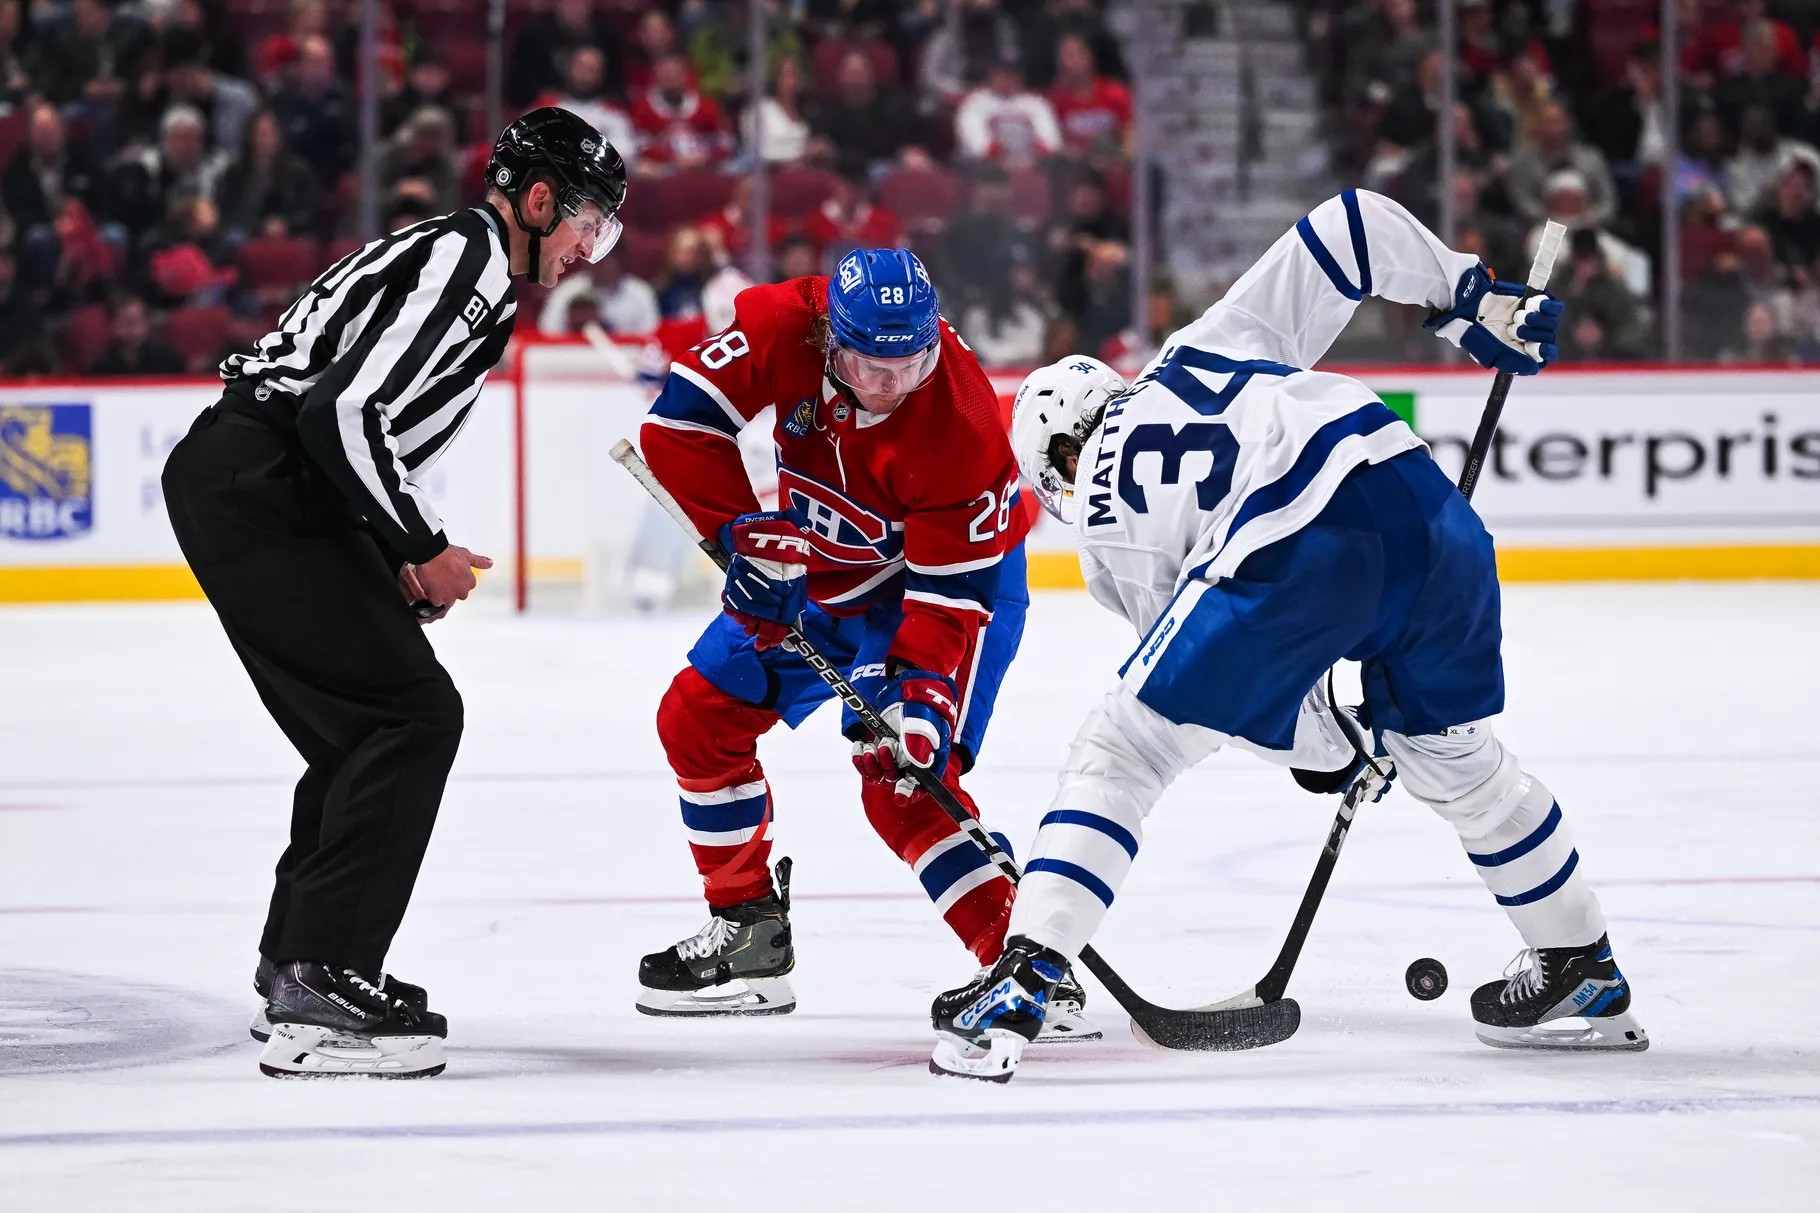 Bunting scores twice, Leafs down Canadiens 5-1